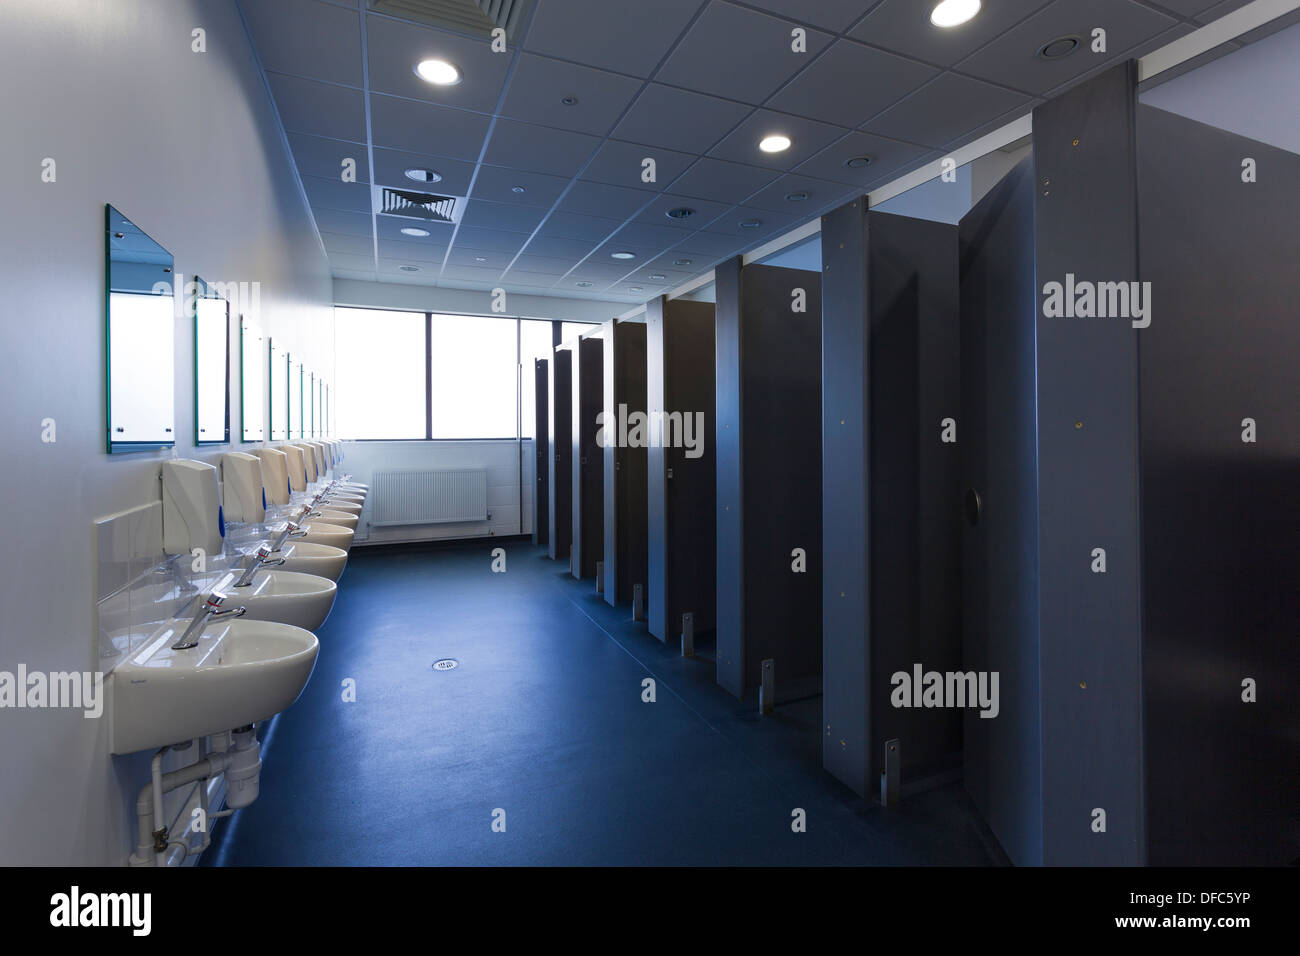 Unoccupied female public toilets with wash basins and cubicles. Stock Photo